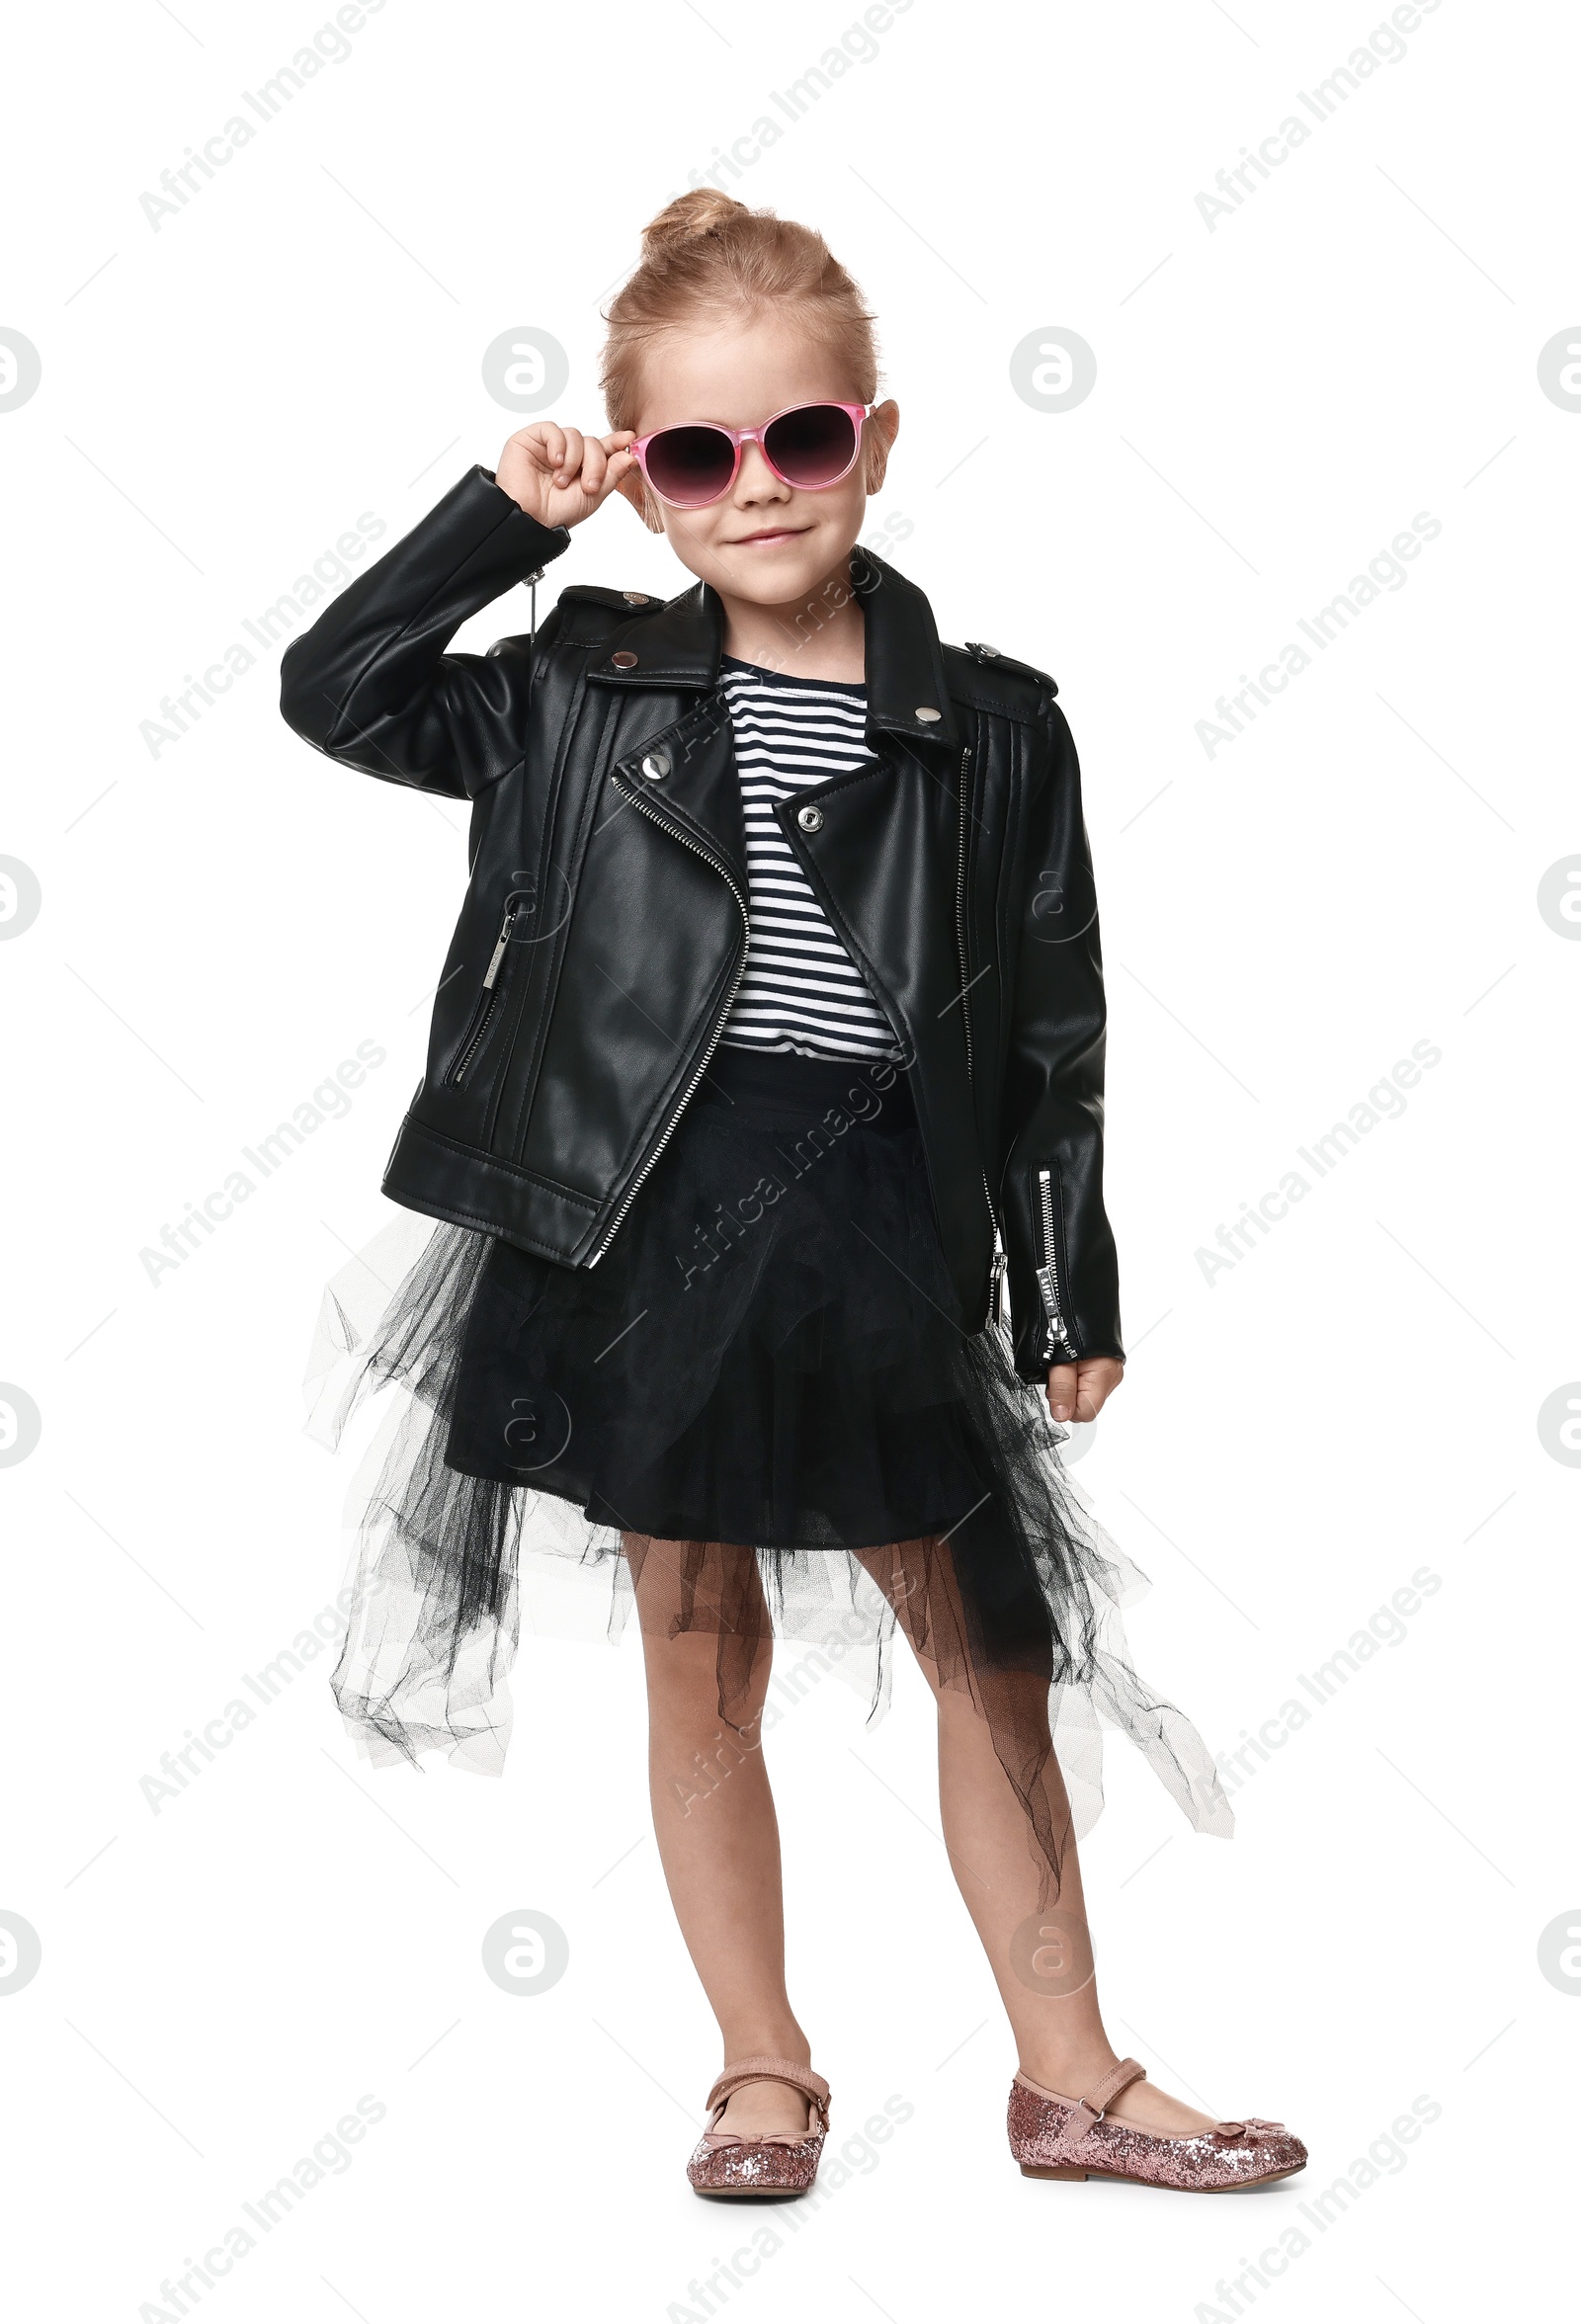 Photo of Cute little girl in sunglasses dancing on white background